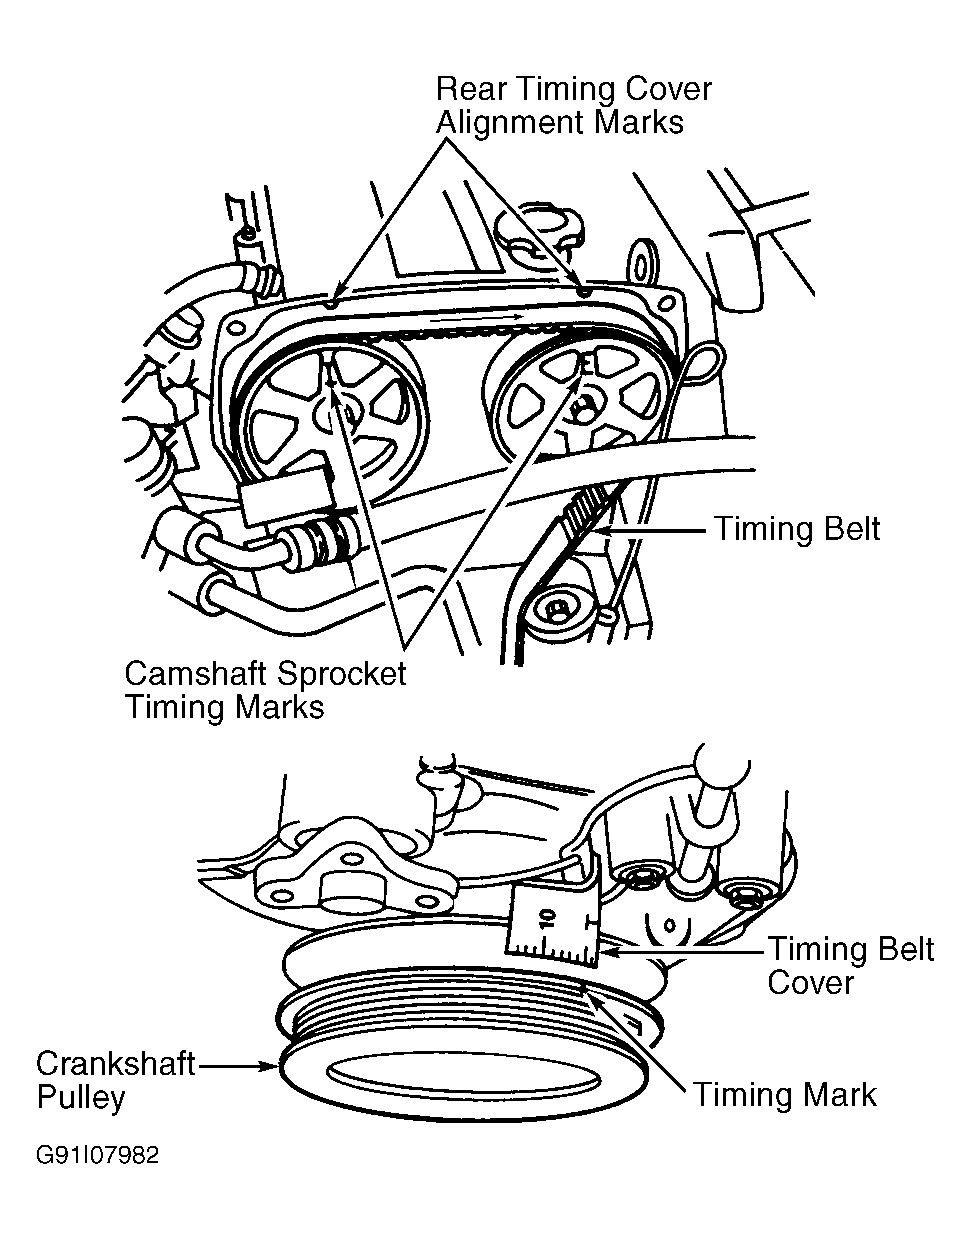 1995 Ford Escort Serpentine Belt Routing and Timing Belt Diagrams